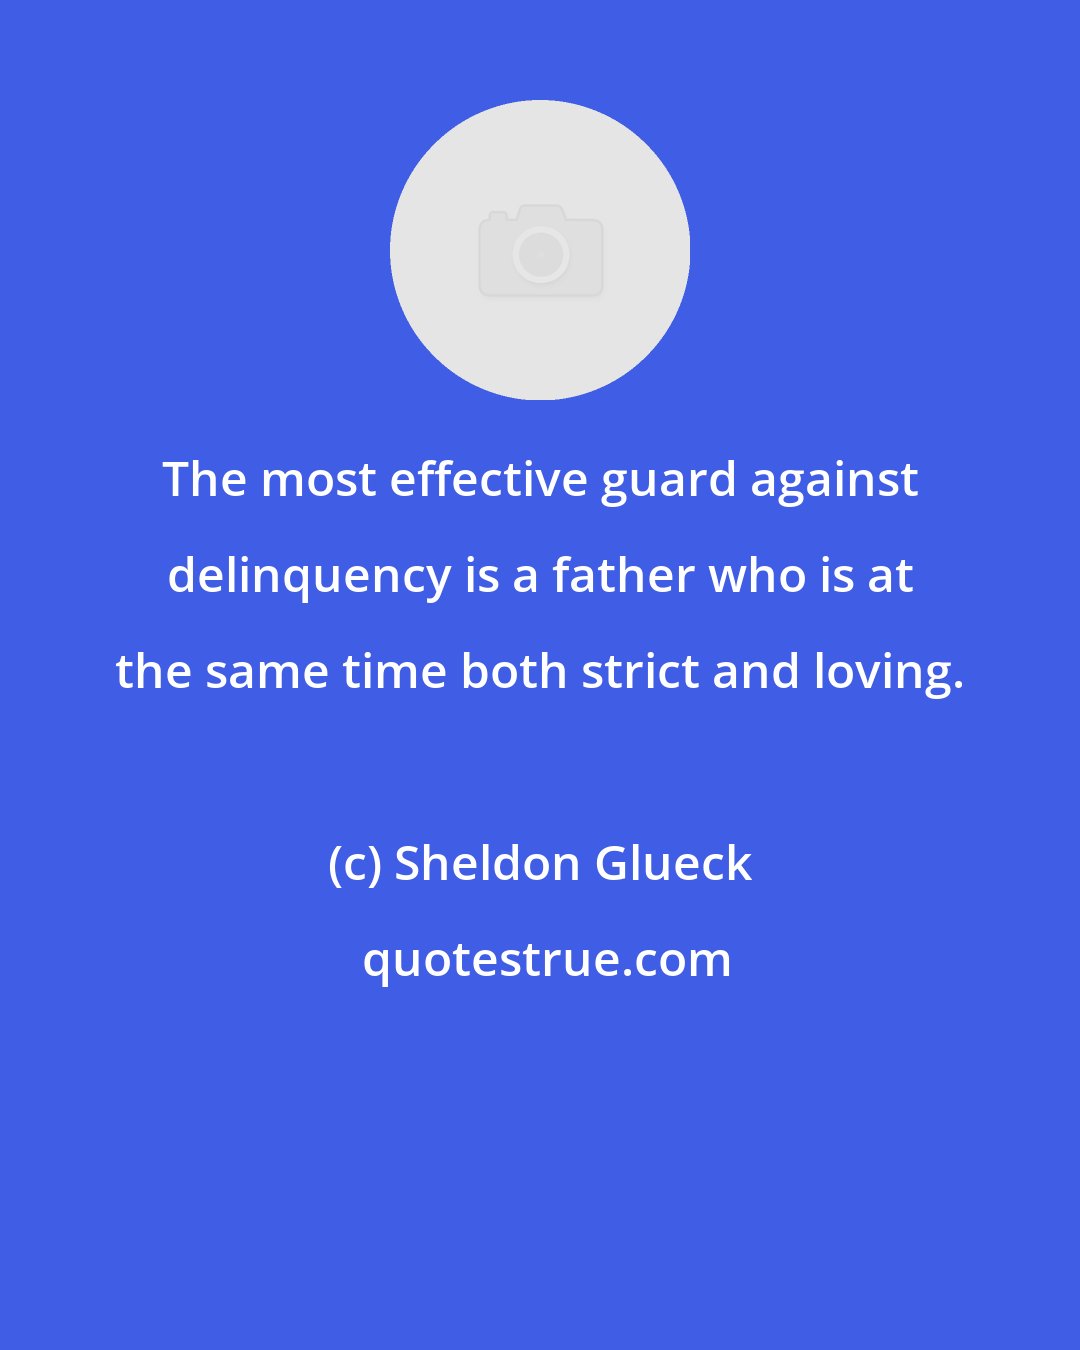 Sheldon Glueck: The most effective guard against delinquency is a father who is at the same time both strict and loving.